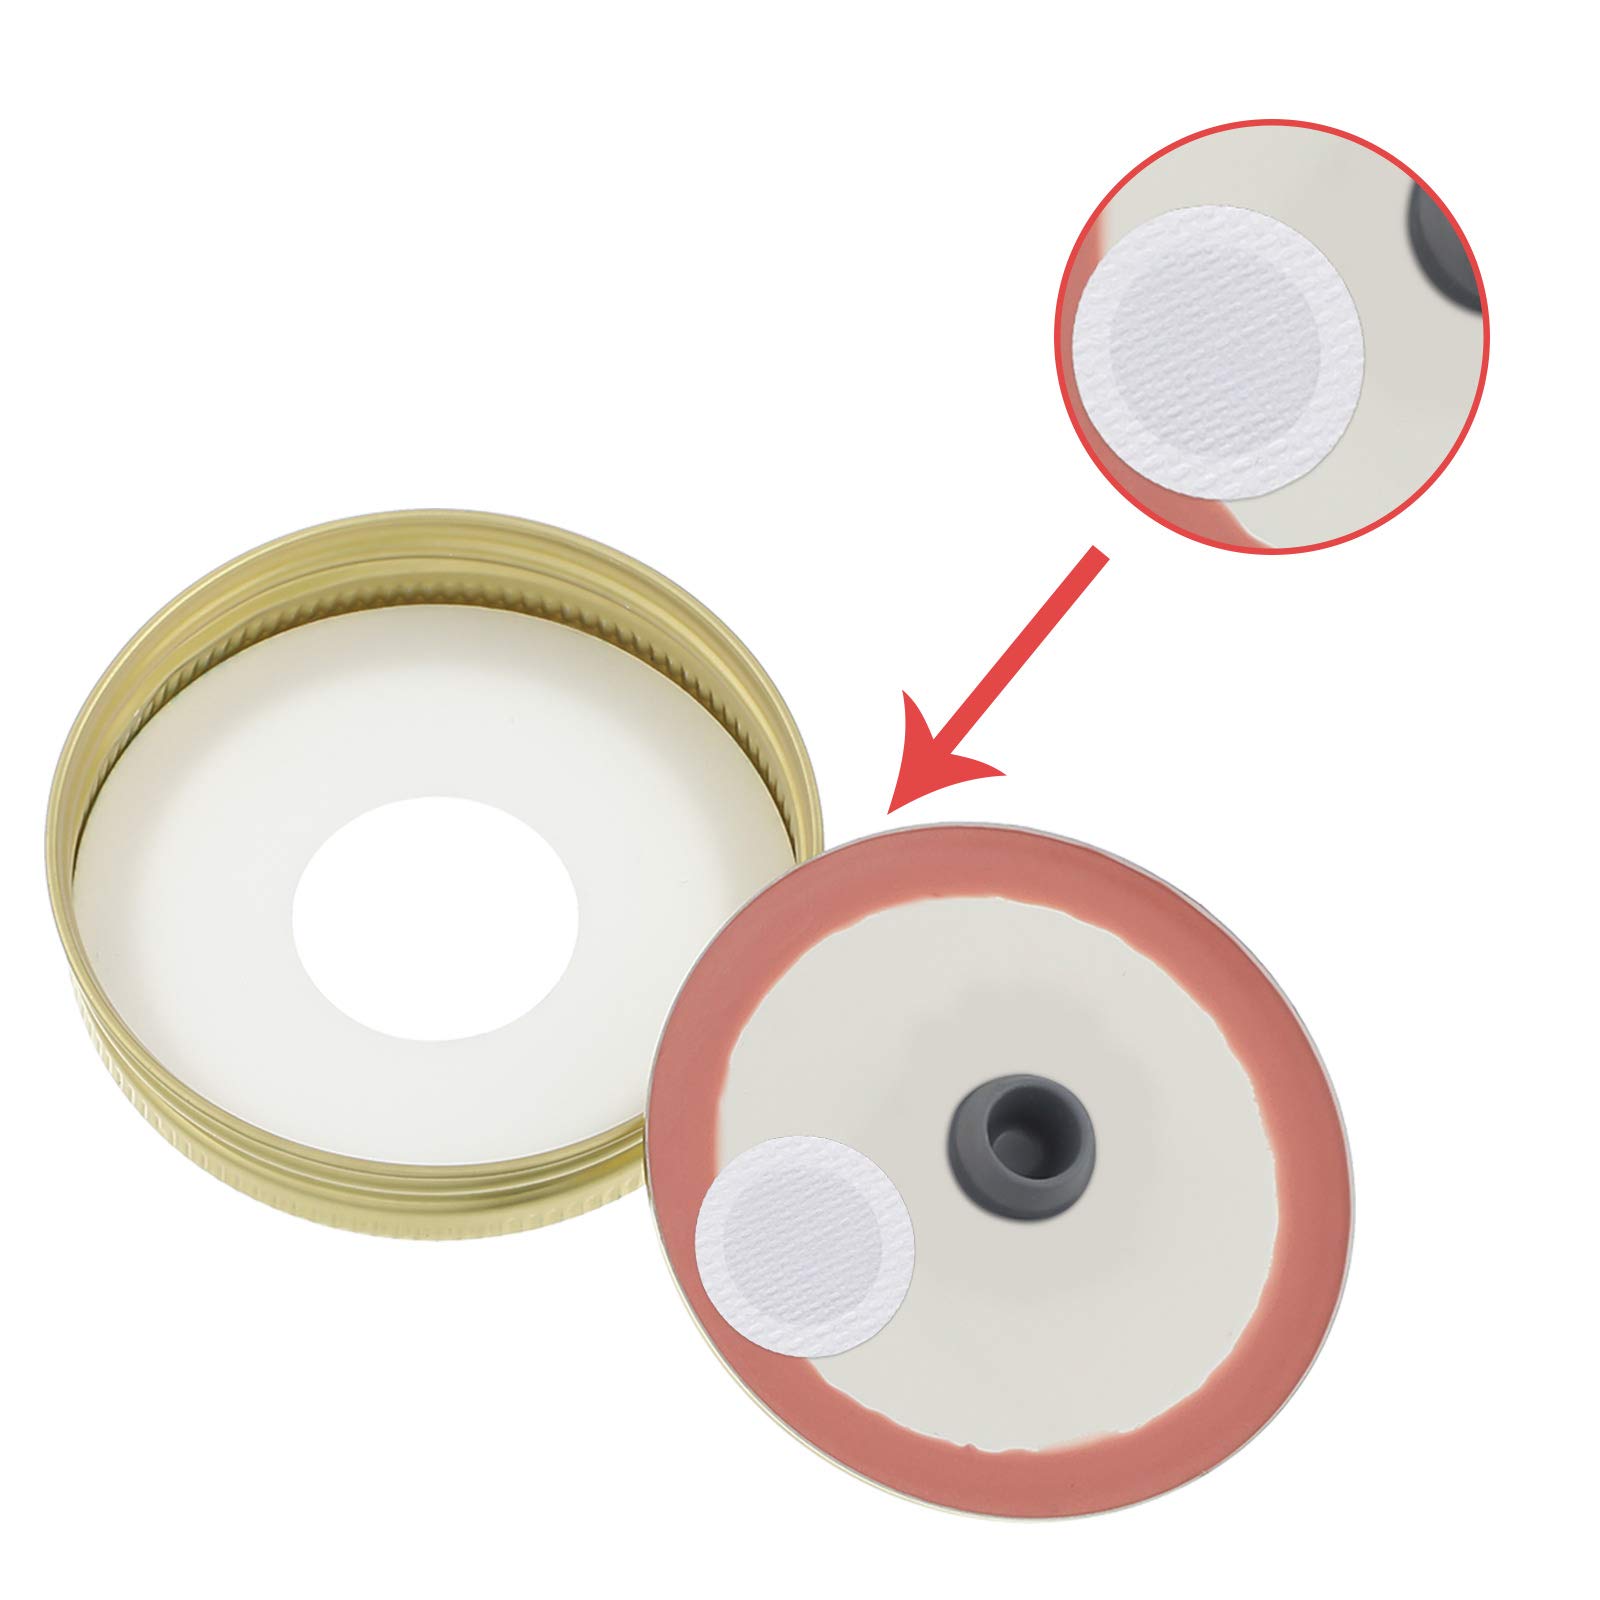 Synthetic Filter Paper Stickers 20 mm 0.3 μm Filter Disc Mushroom Applied Under Wide Mouth Jar Lid for Mushroom Cultivation (256)